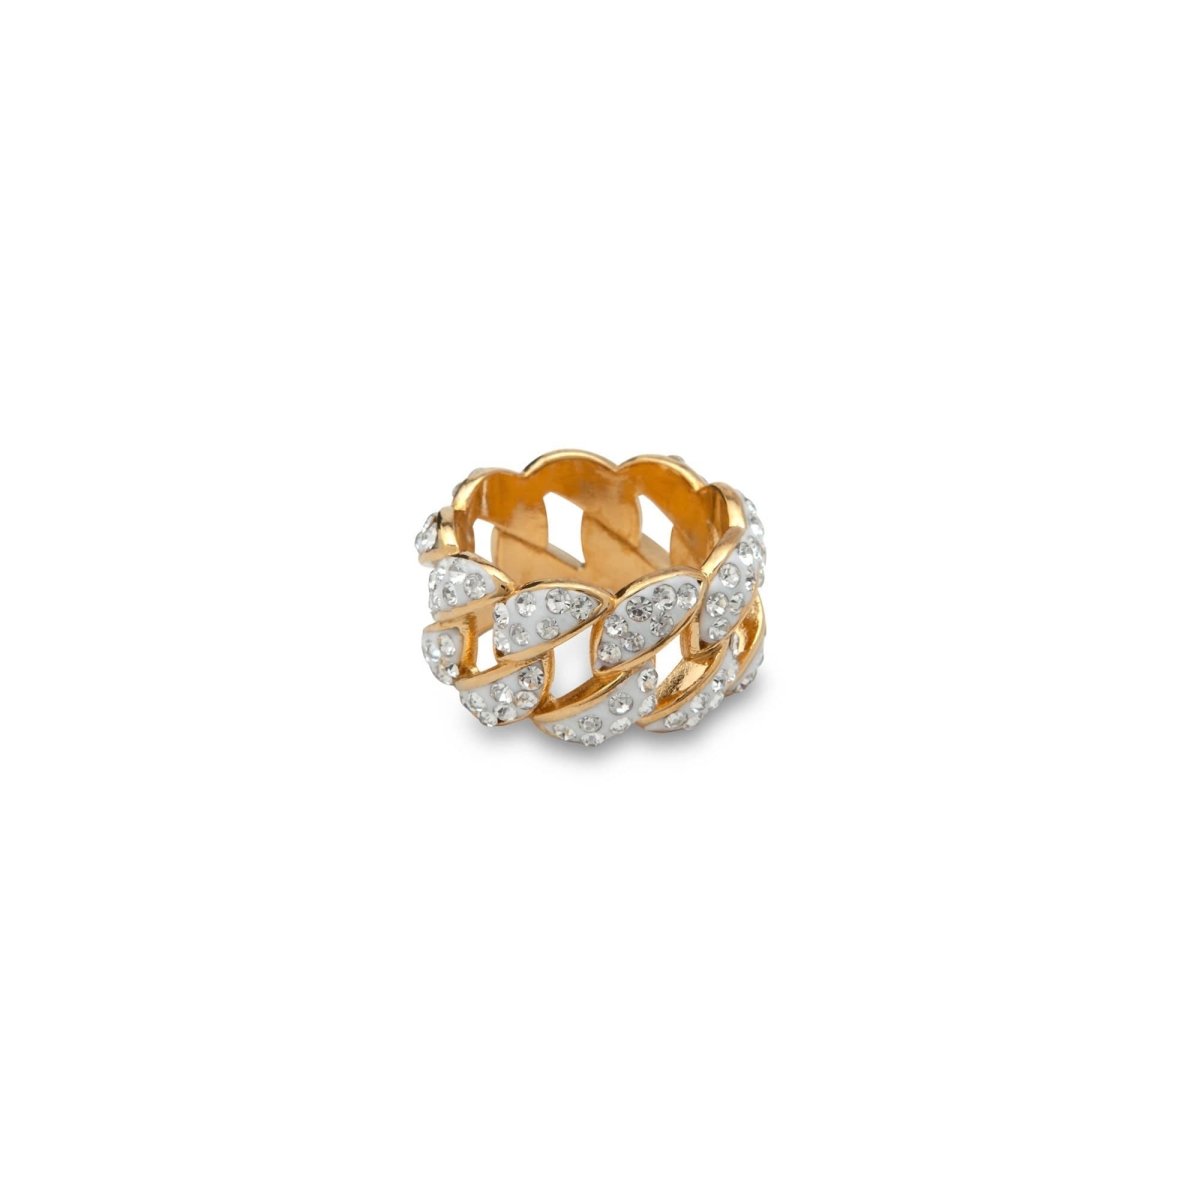 Patterned Diamond Bezzled Ring - MenSuits